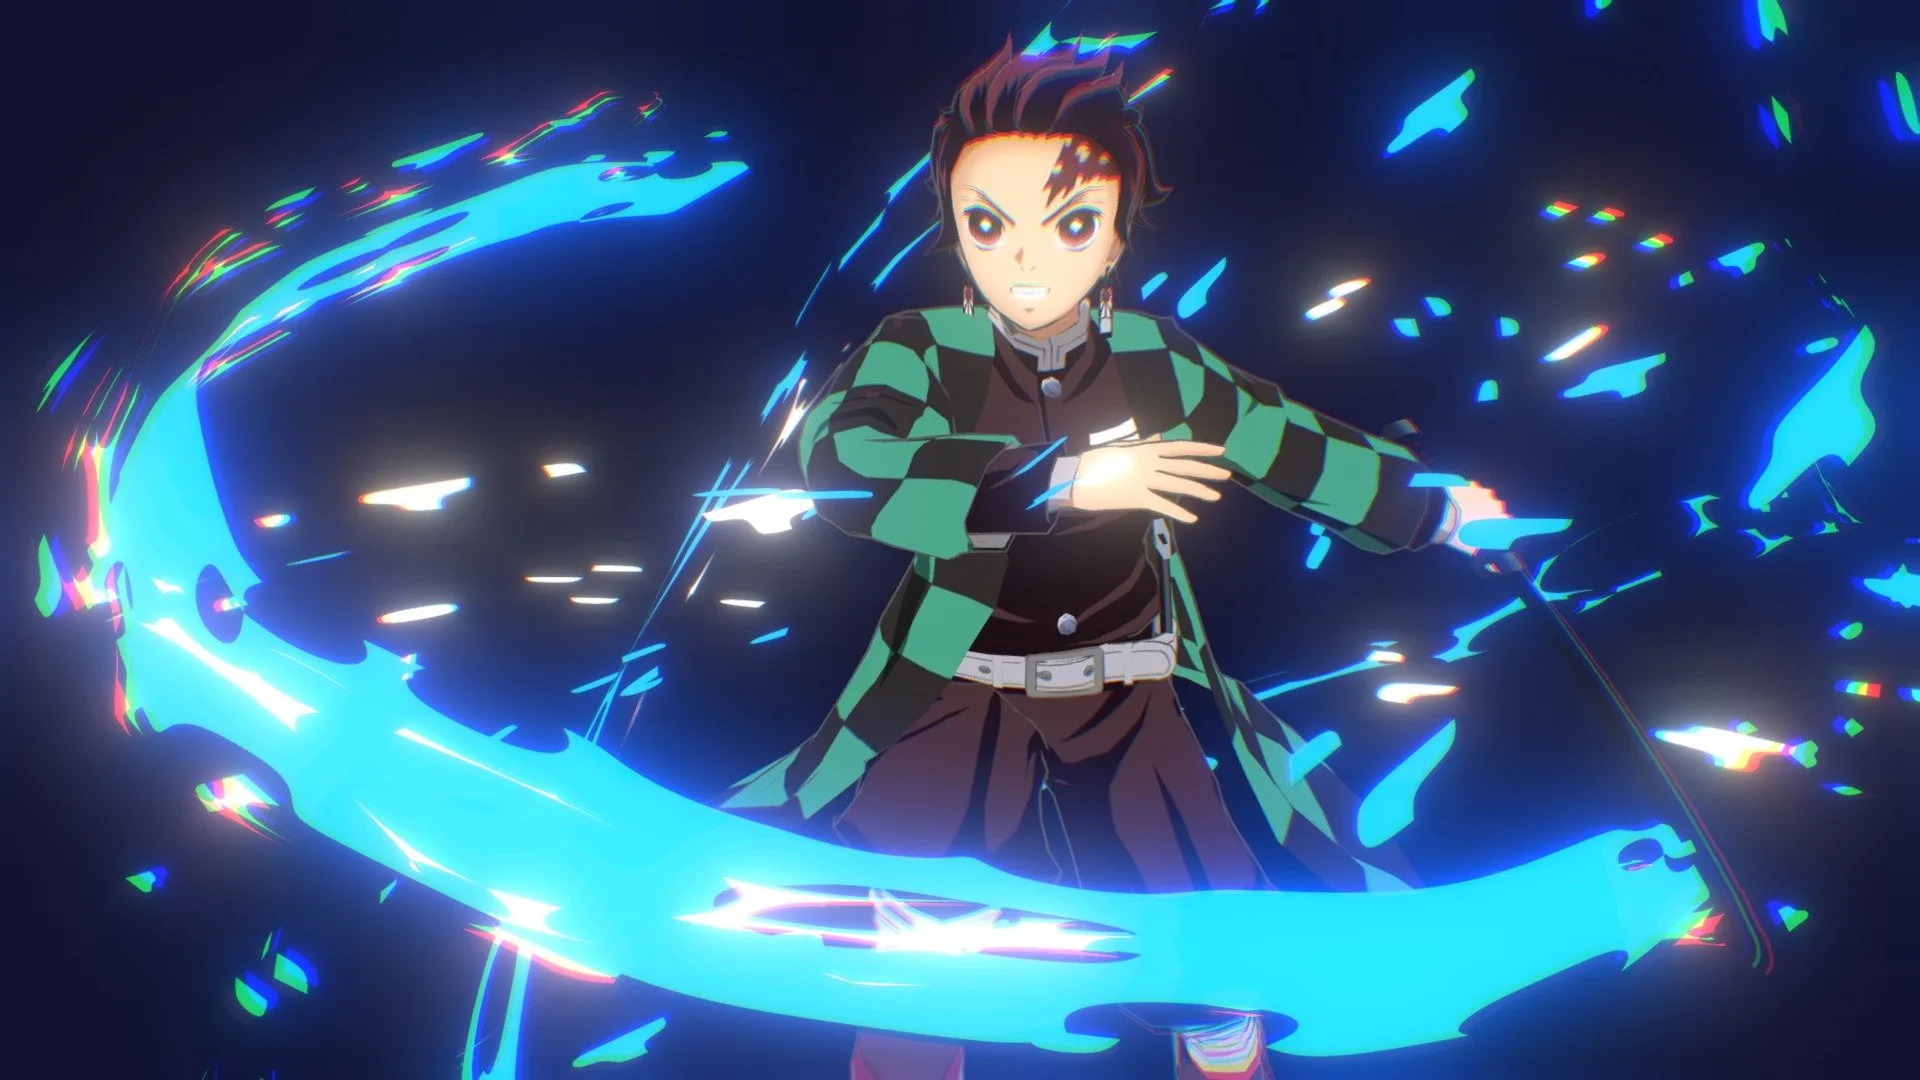 Tanjiro from Demon Slayer in green and black clothes with a sword in his hand